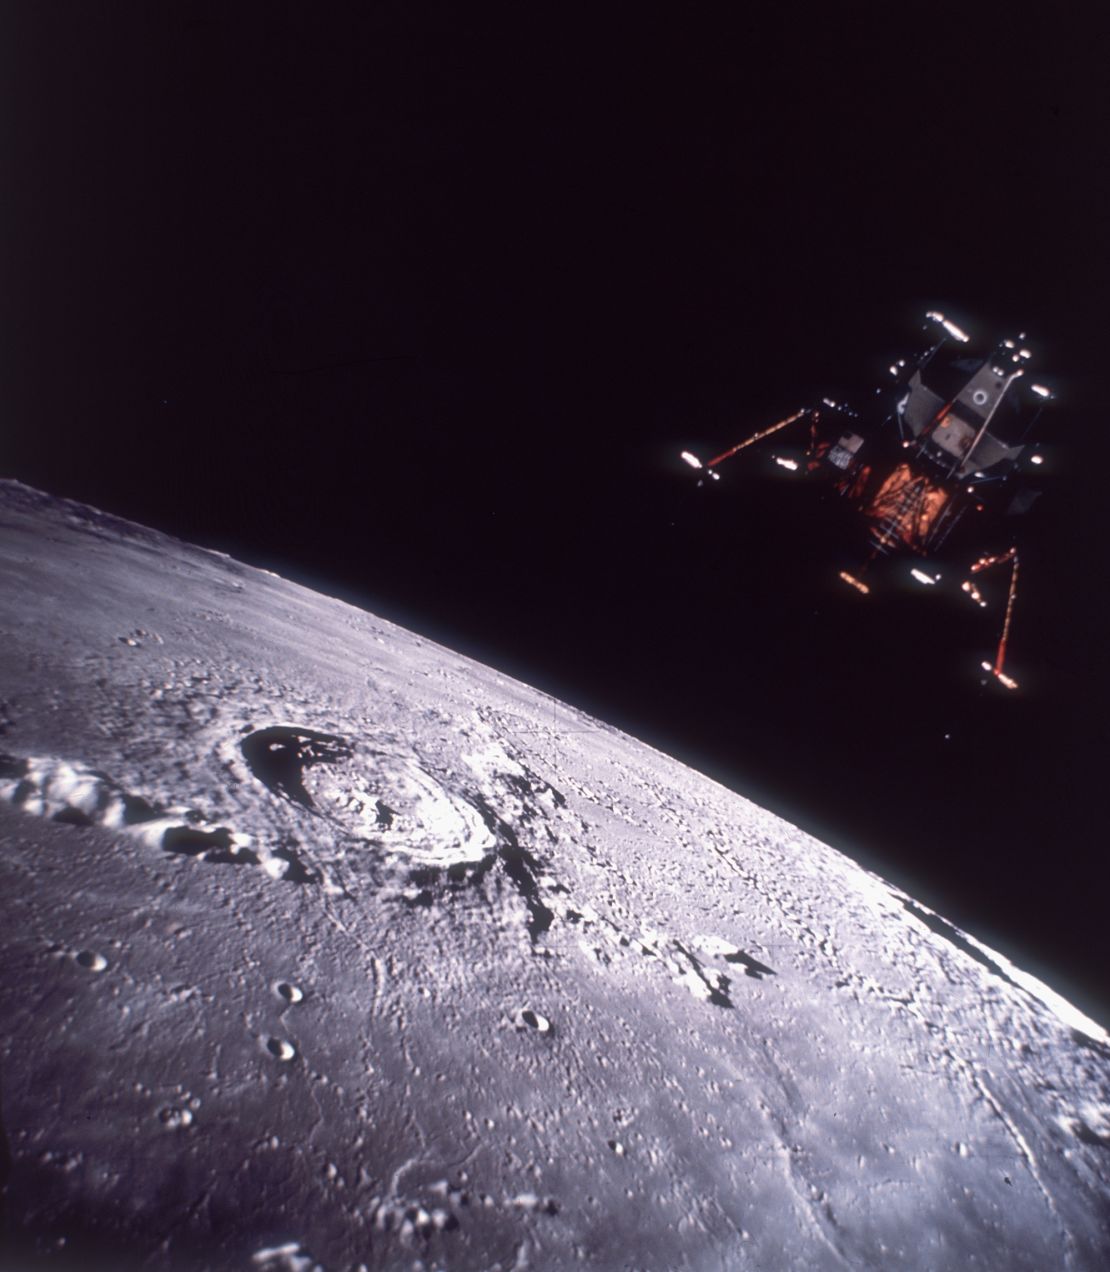 The Eagle lunar lander — carrying the first humans to reach the moon — descends during the Apollo 11 mission on July 20, 1969. This is a composite image comprised of two separate shots.